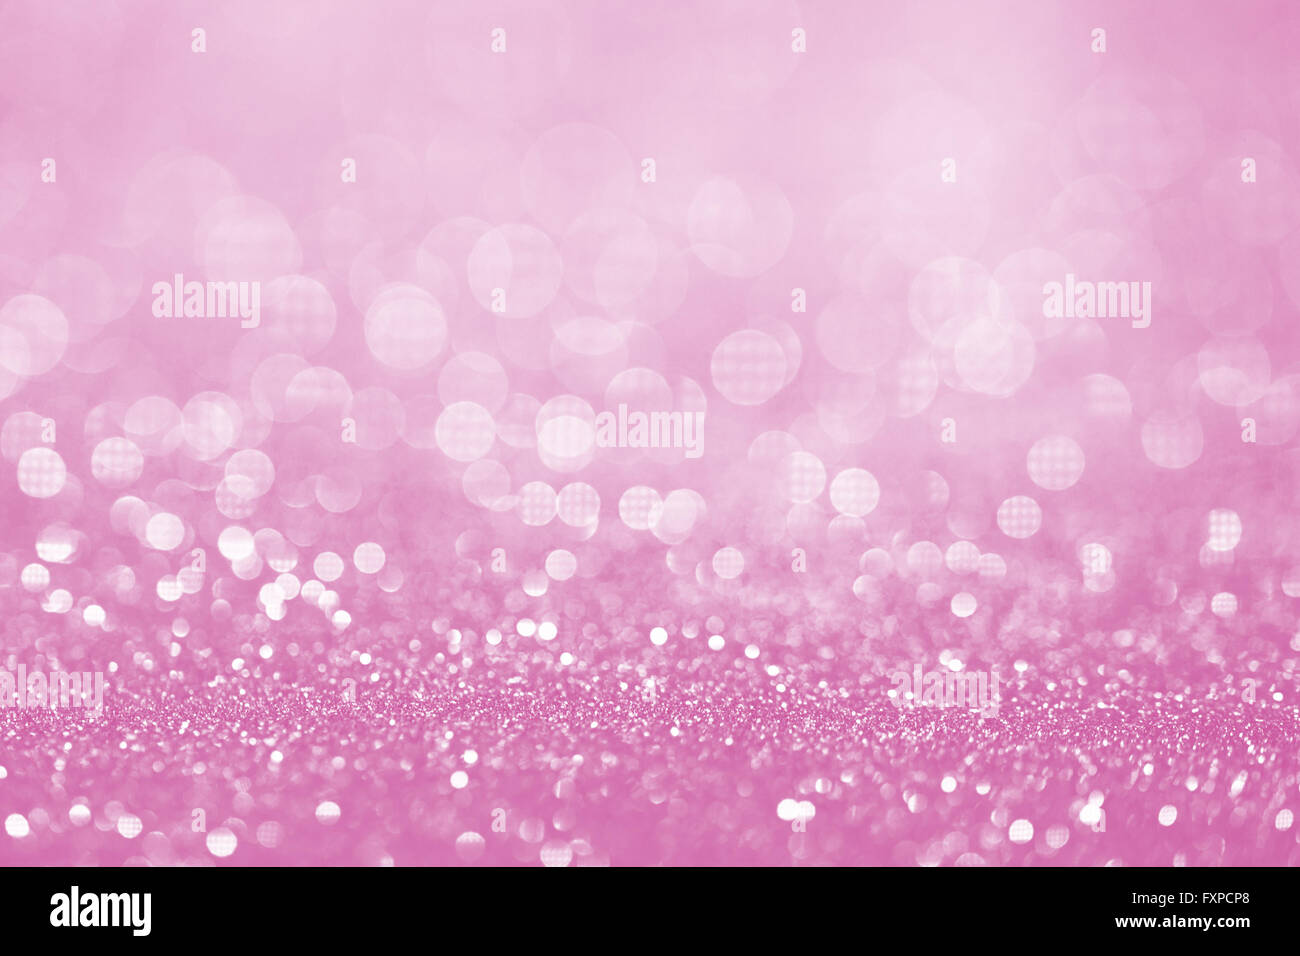 Pink Glitter: Over 264,923 Royalty-Free Licensable Stock Photos